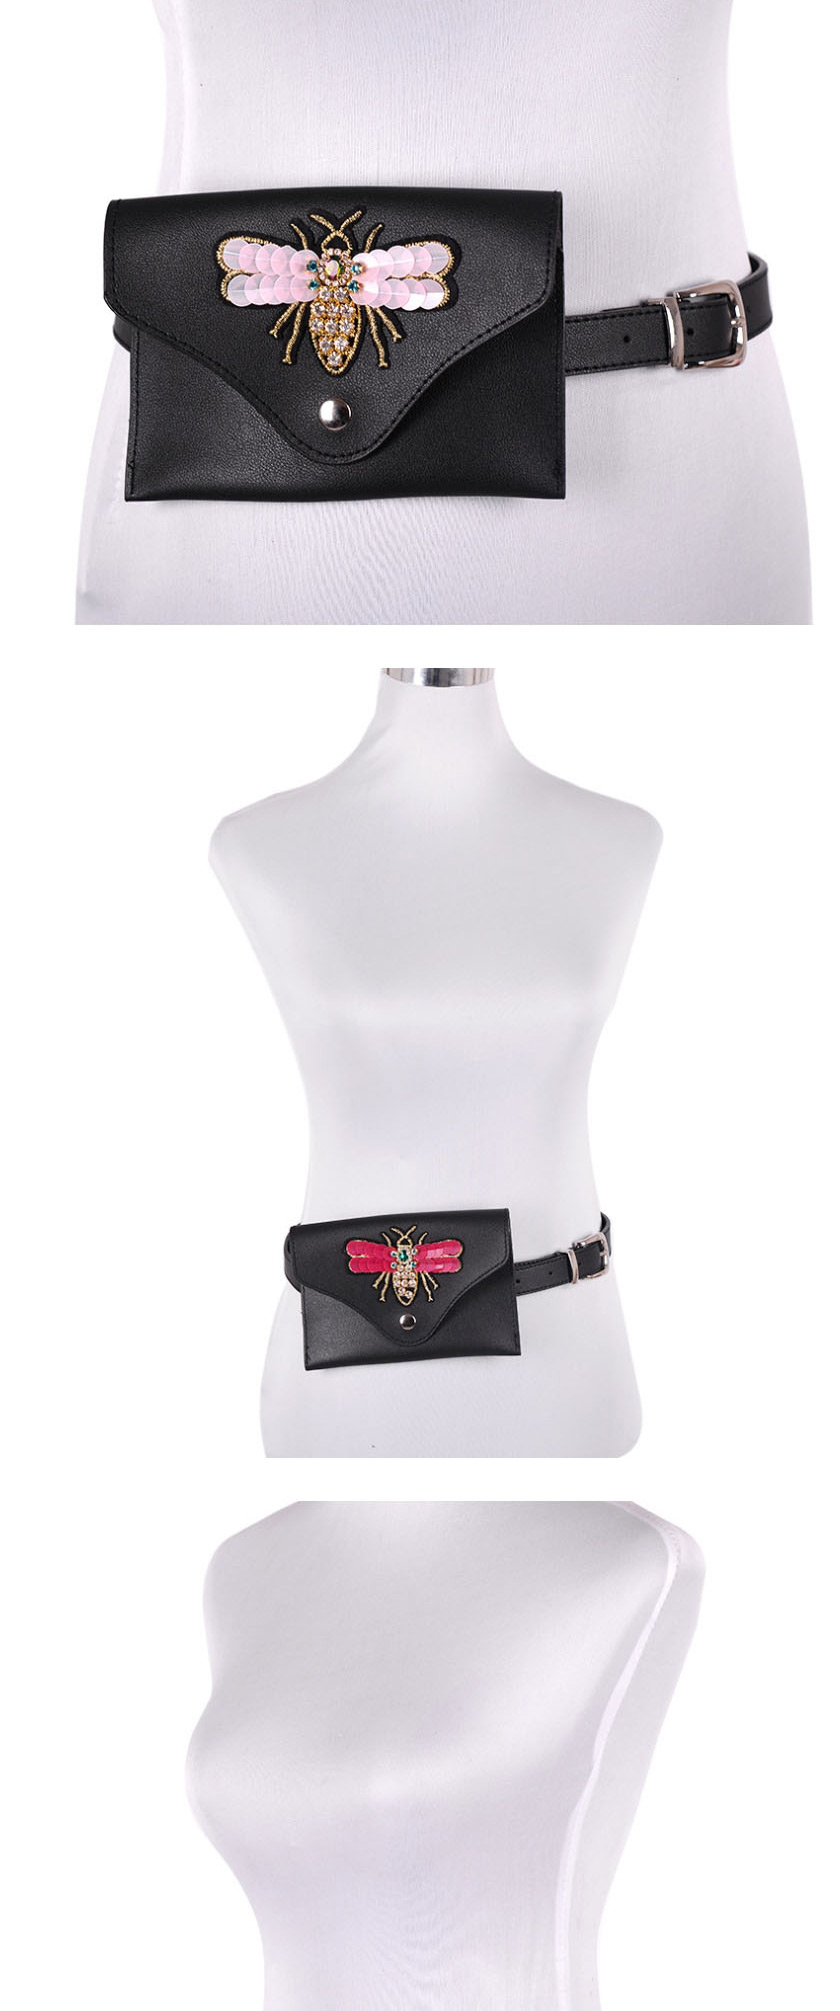 Fashion Silver Light Red Bevel Diagonal Belt Buckle Belt With Diamond Sequins,Thin belts